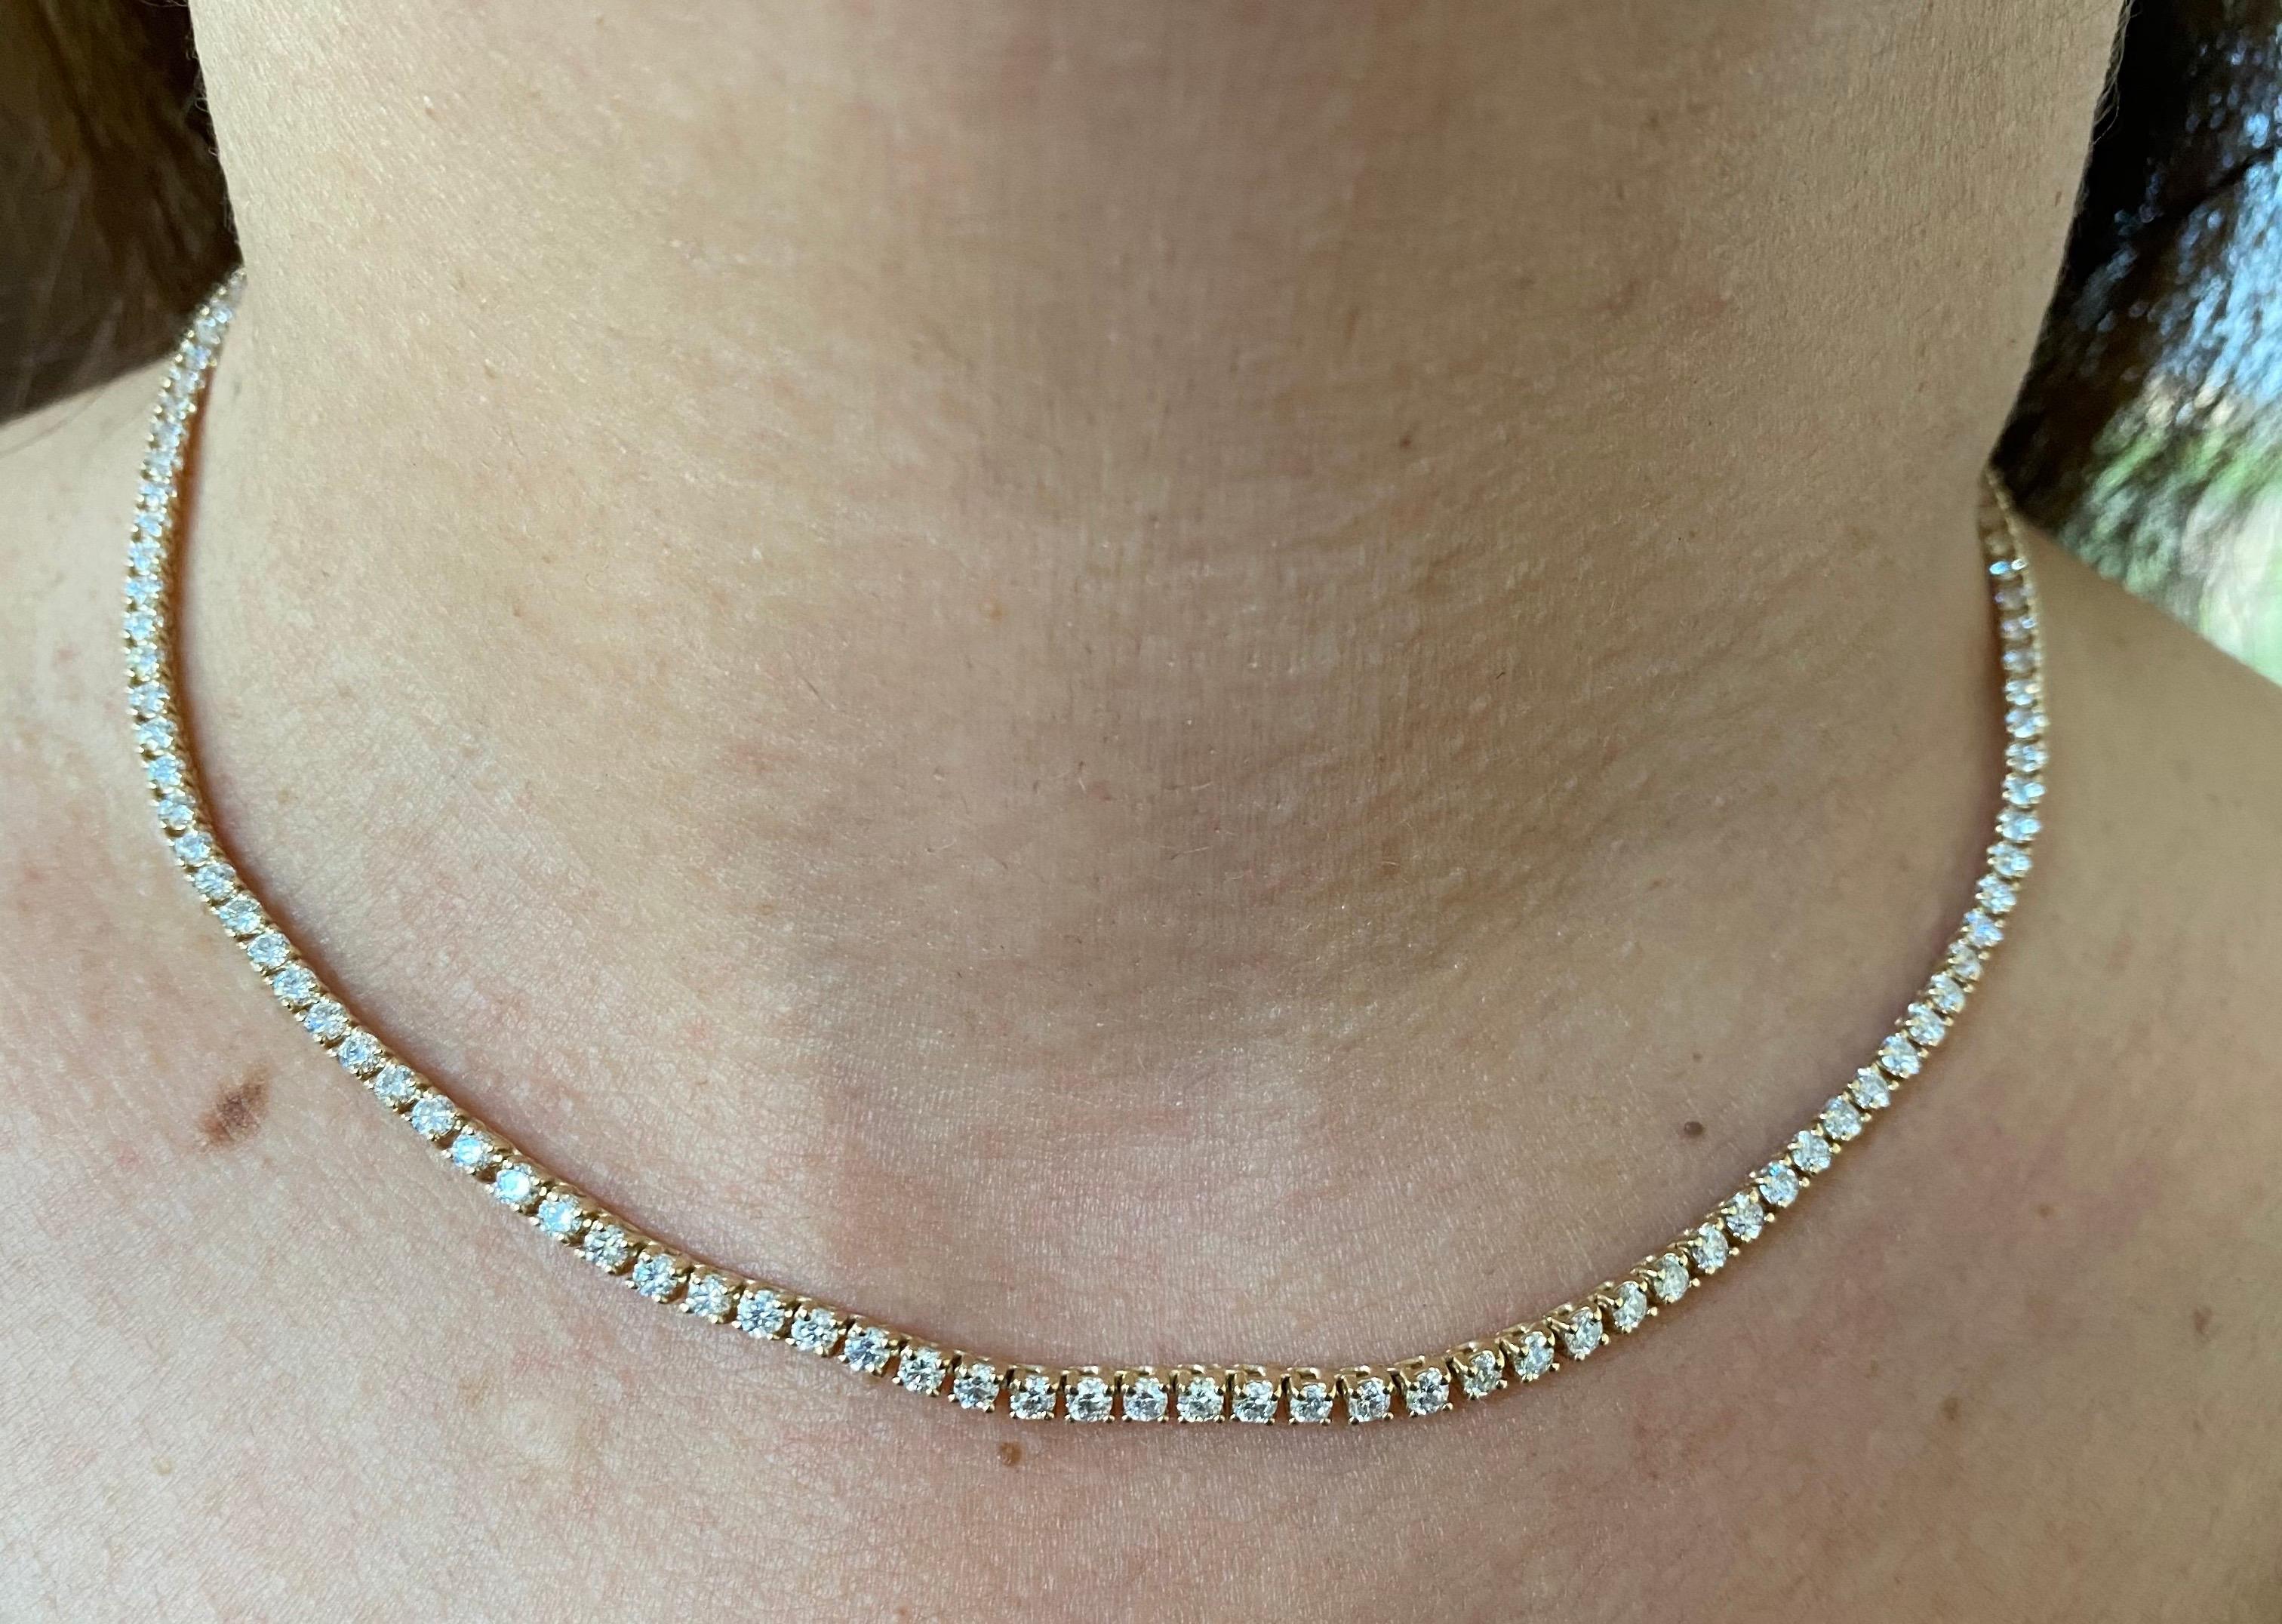 4 Prong tennis necklace set in 14K yellow gold. The necklace is set with 0.05 carat stones, the total weight is 7.01 carats. The color of the stones are G, the clarity is SI1-SI2. The necklace is 16 inches.